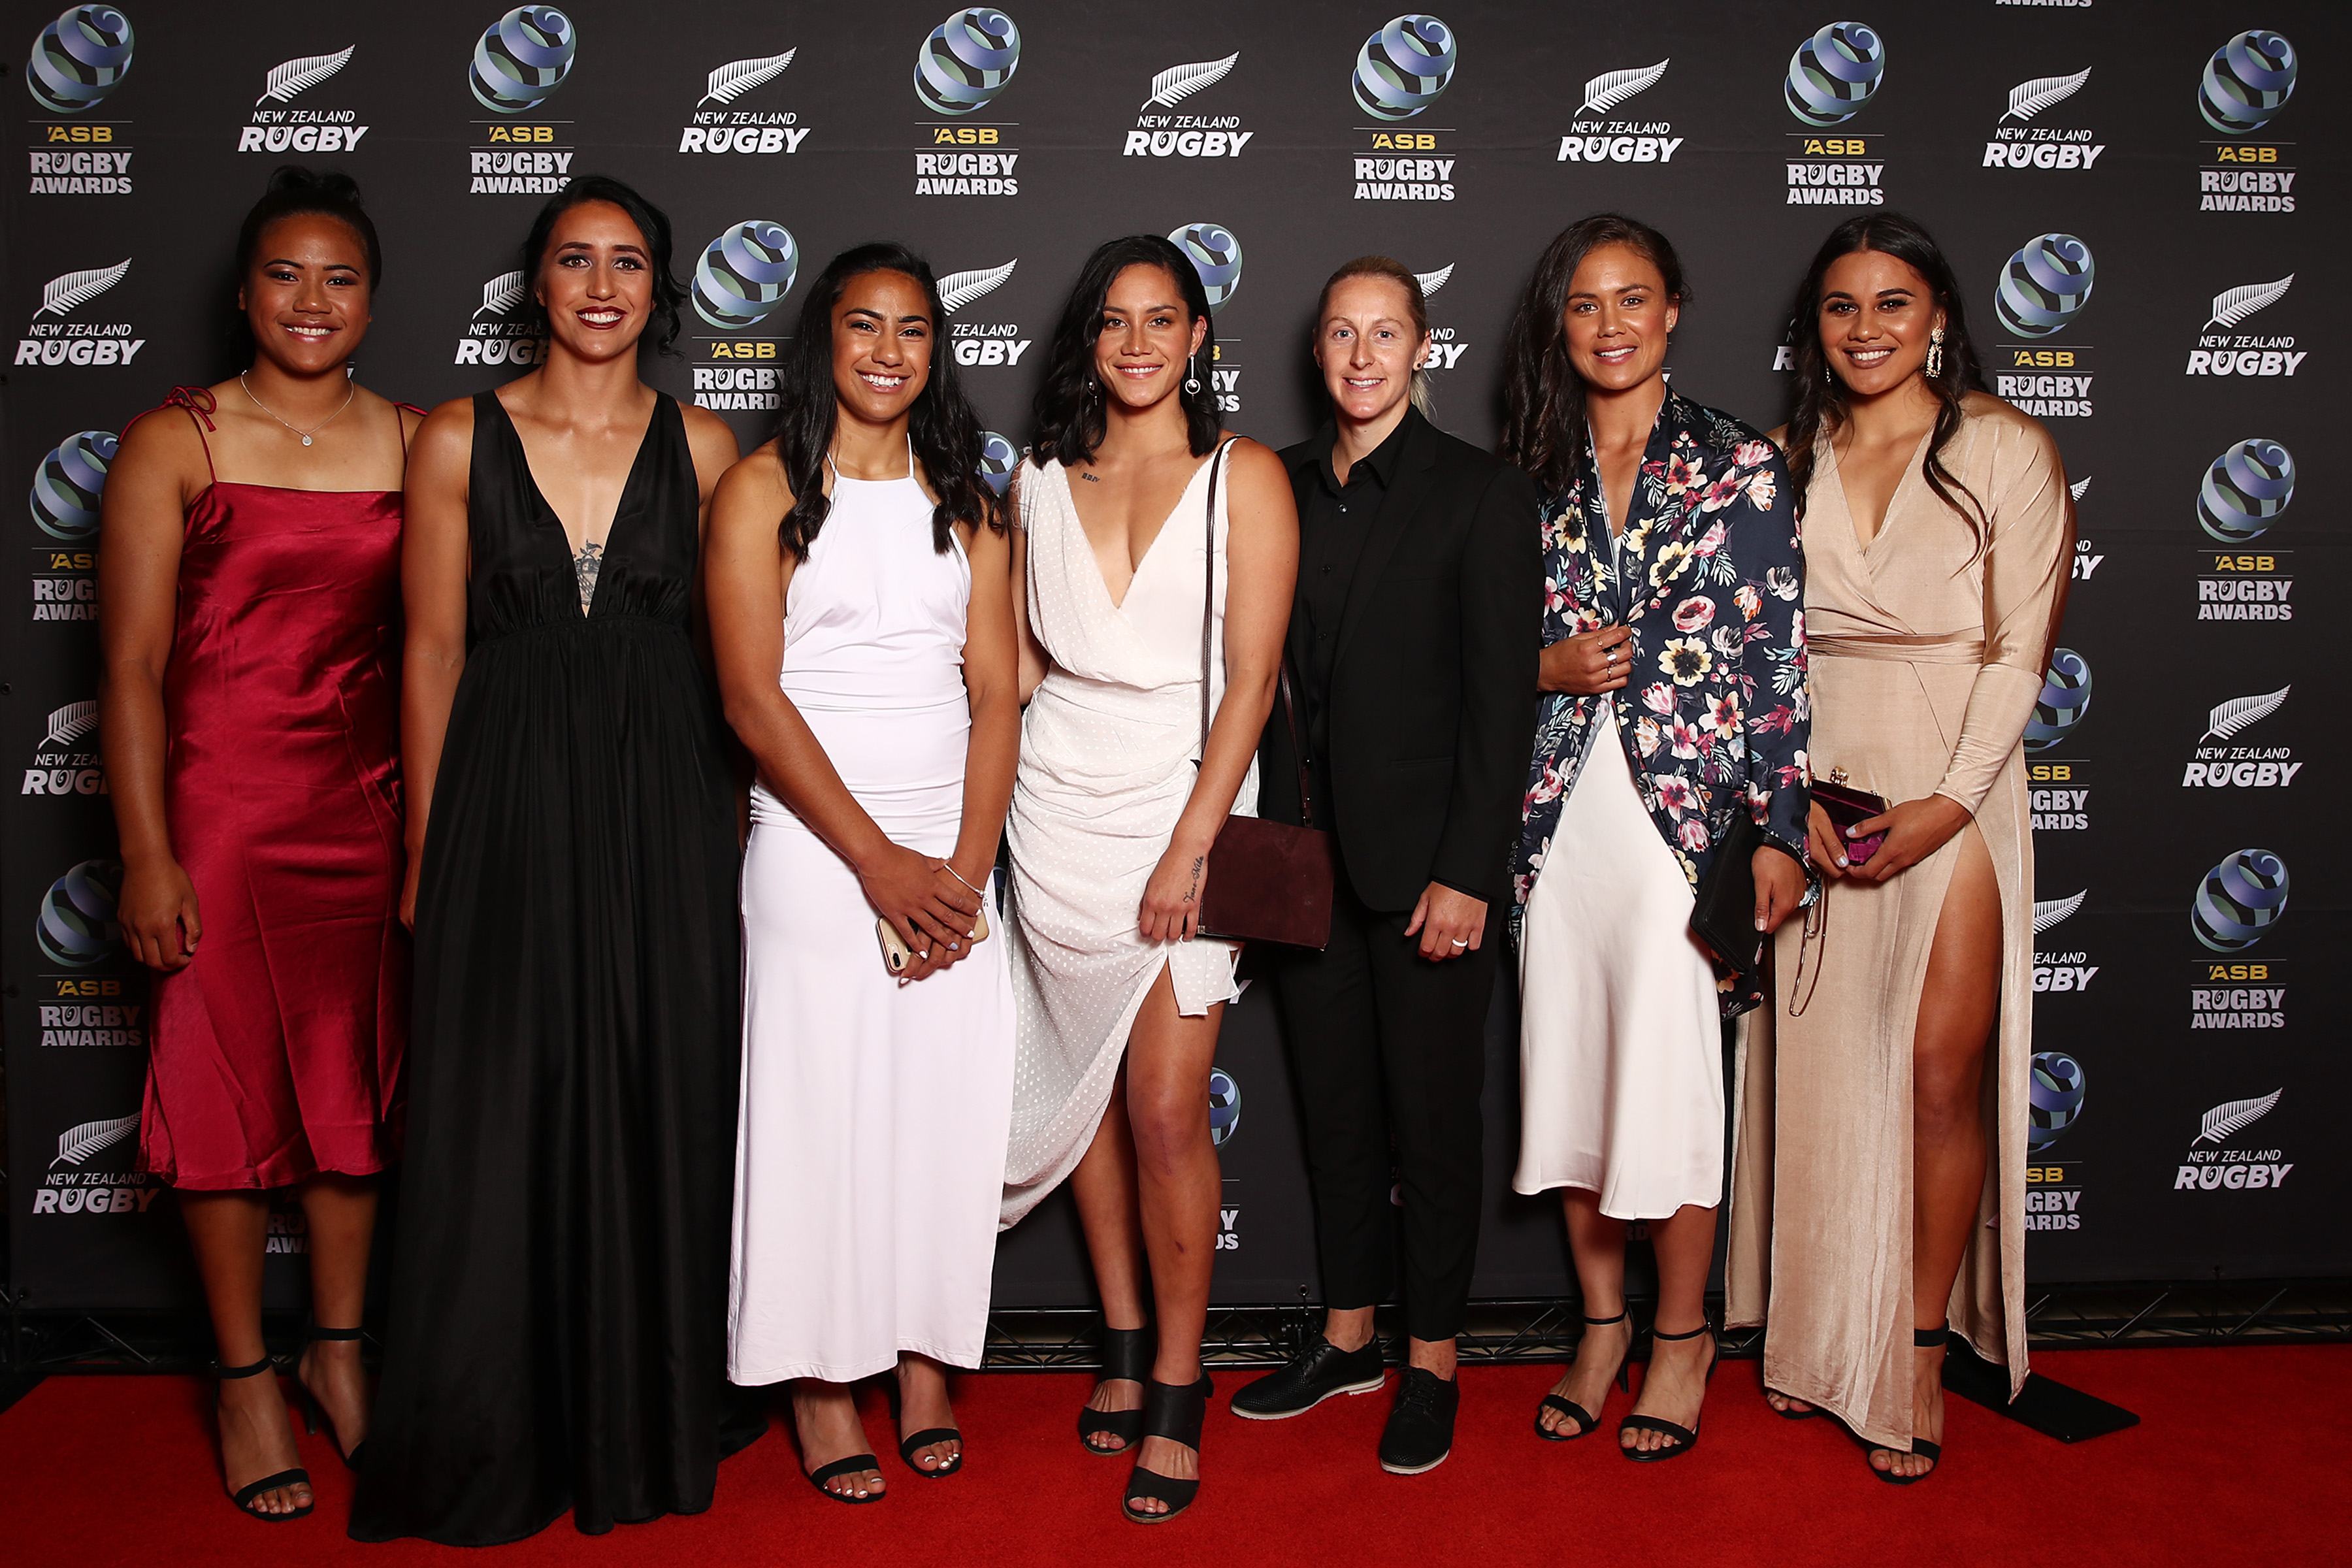 Nominations for 2019 ASB Rugby Awards revealed